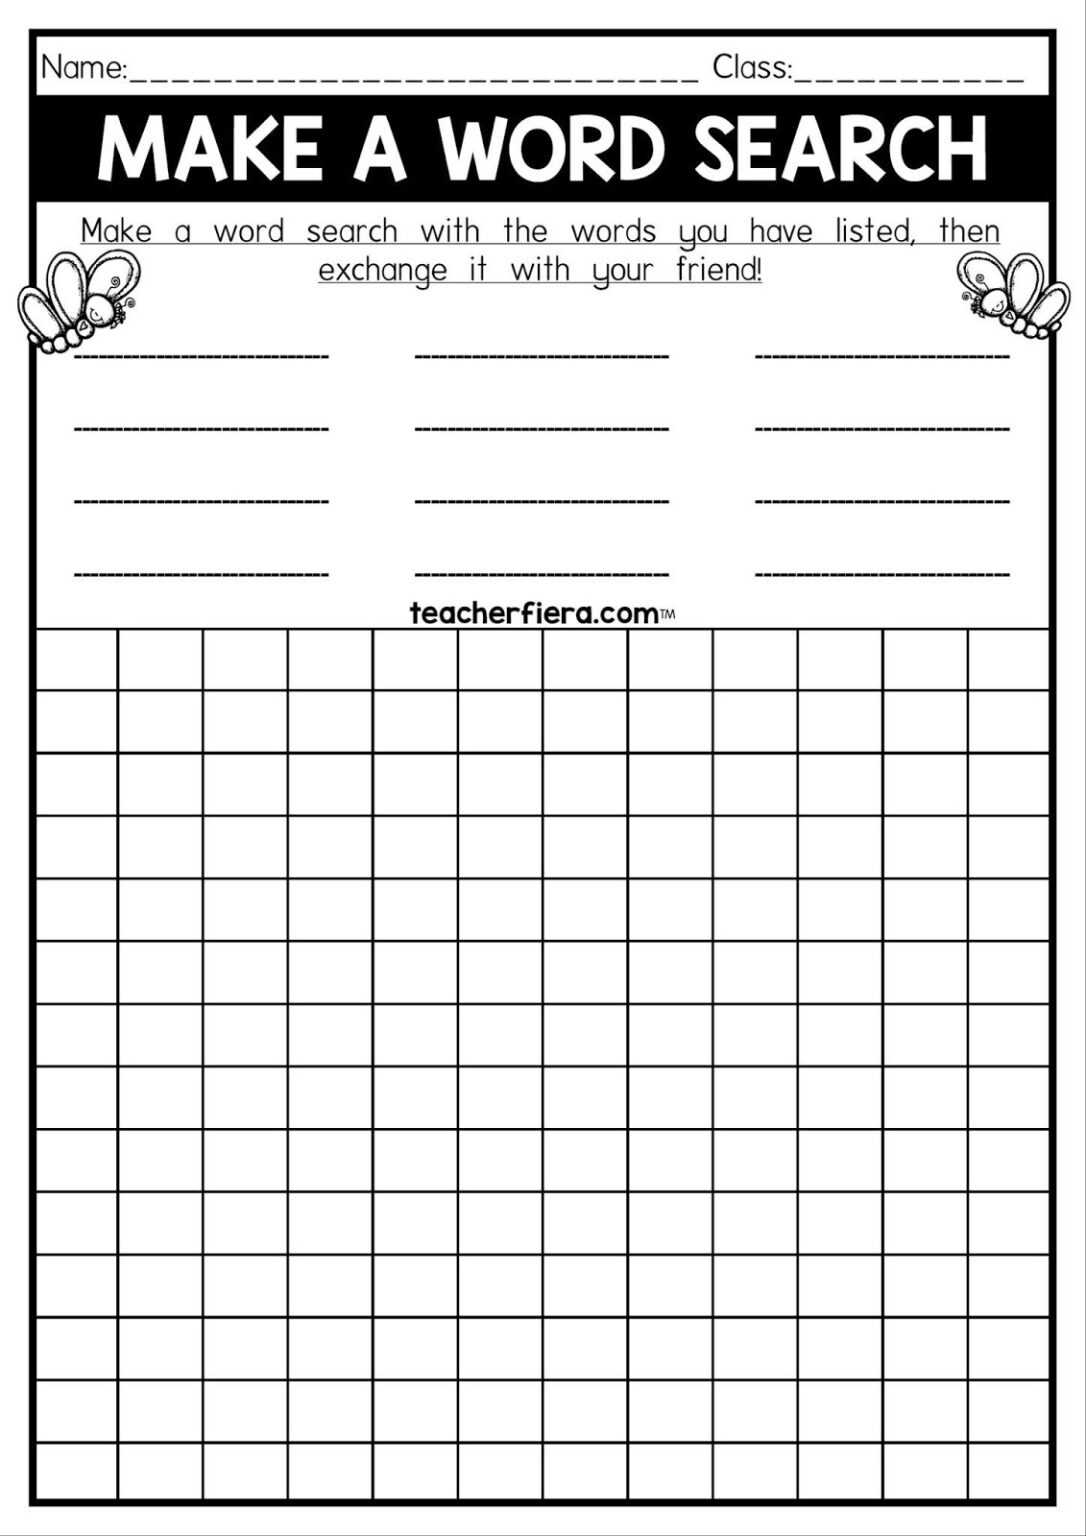 teacherfiera-make-a-word-search-in-word-sleuth-template-professional-template